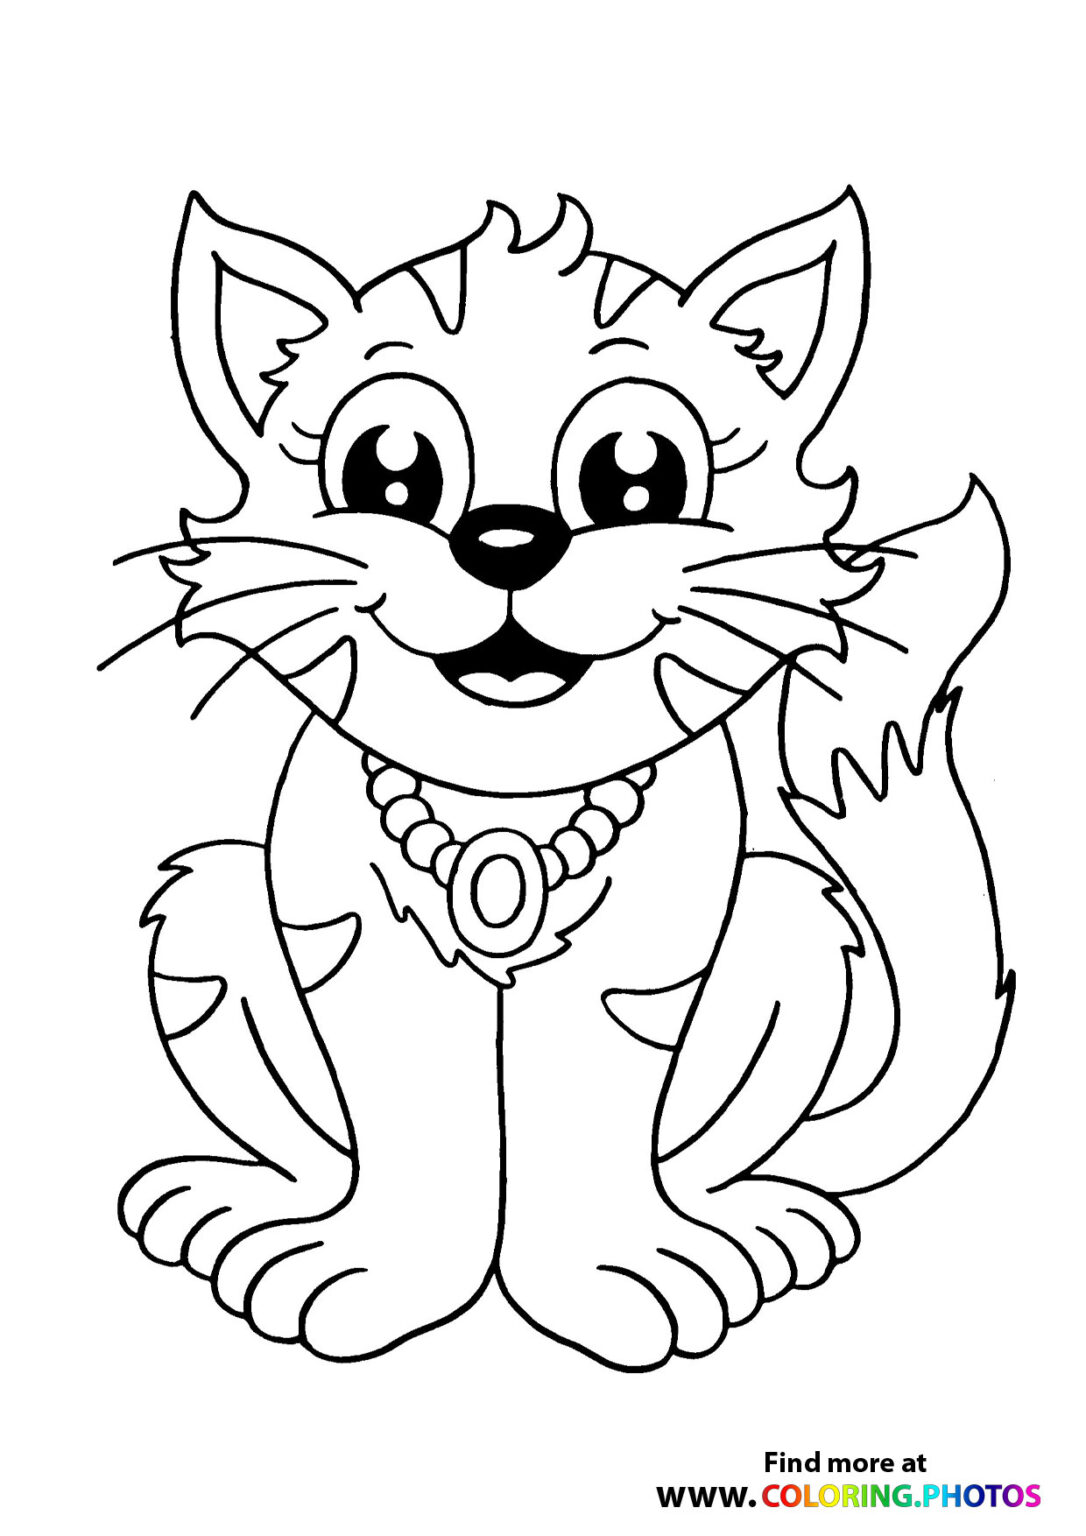 Gaby's Dollhouse - all characters - Coloring Pages for kids